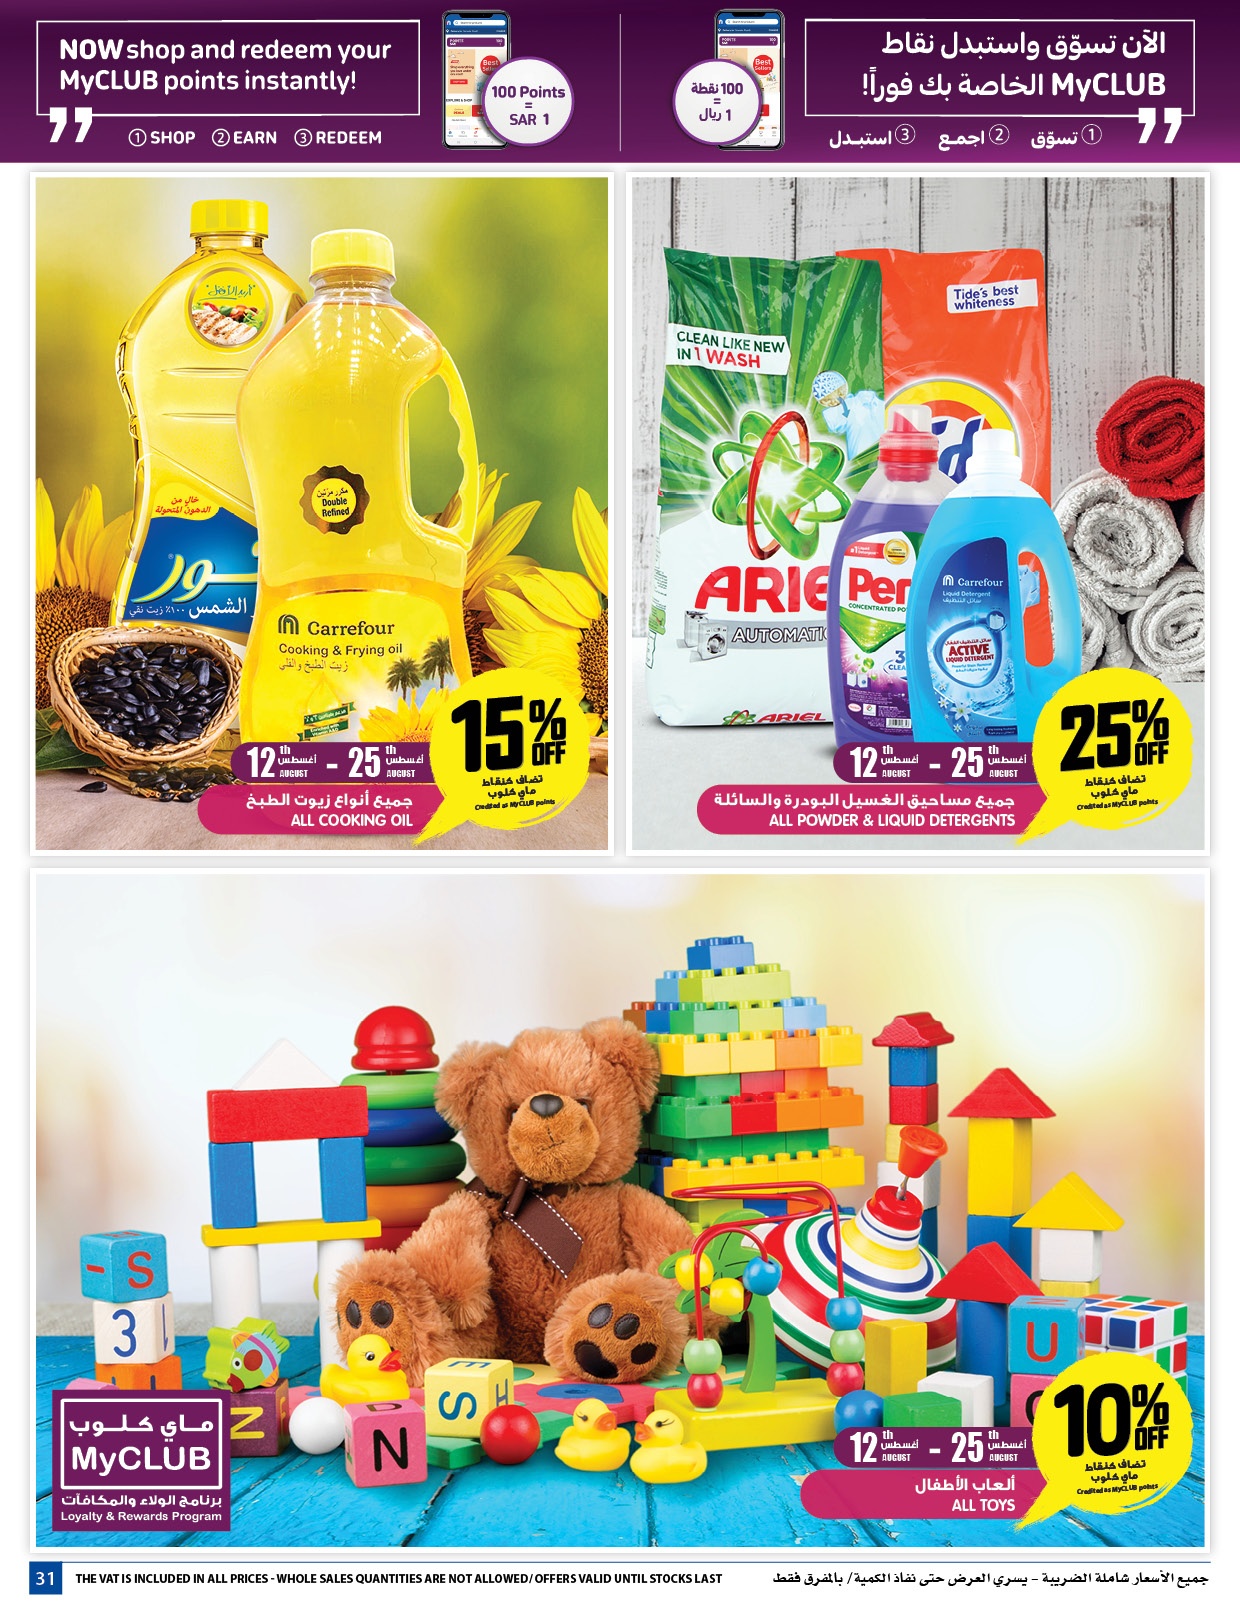 Carrefour Festival Offers from 12/8 till 25/8 | Carrefour KSA 33